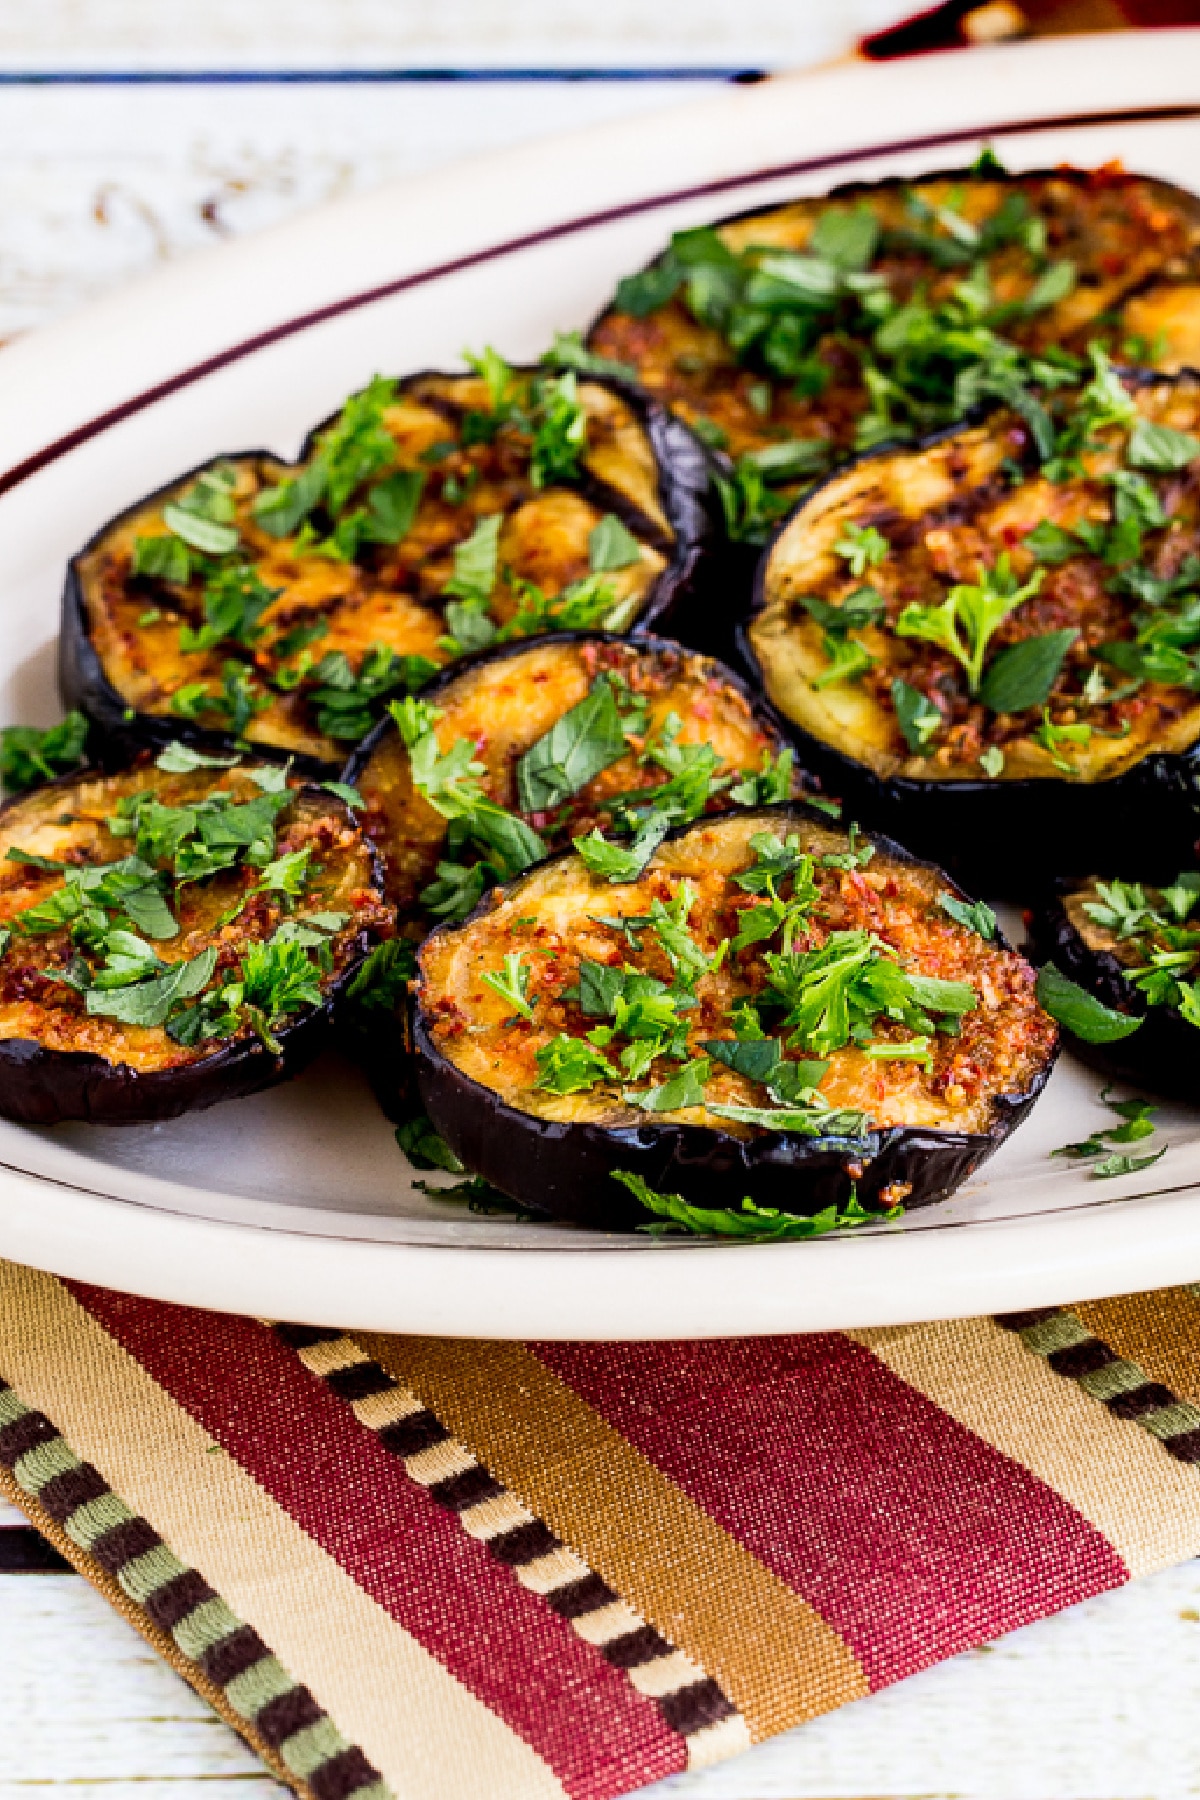 Spicy Grilled Eggplant shown on serving plate with fresh herbs and colorful napkin